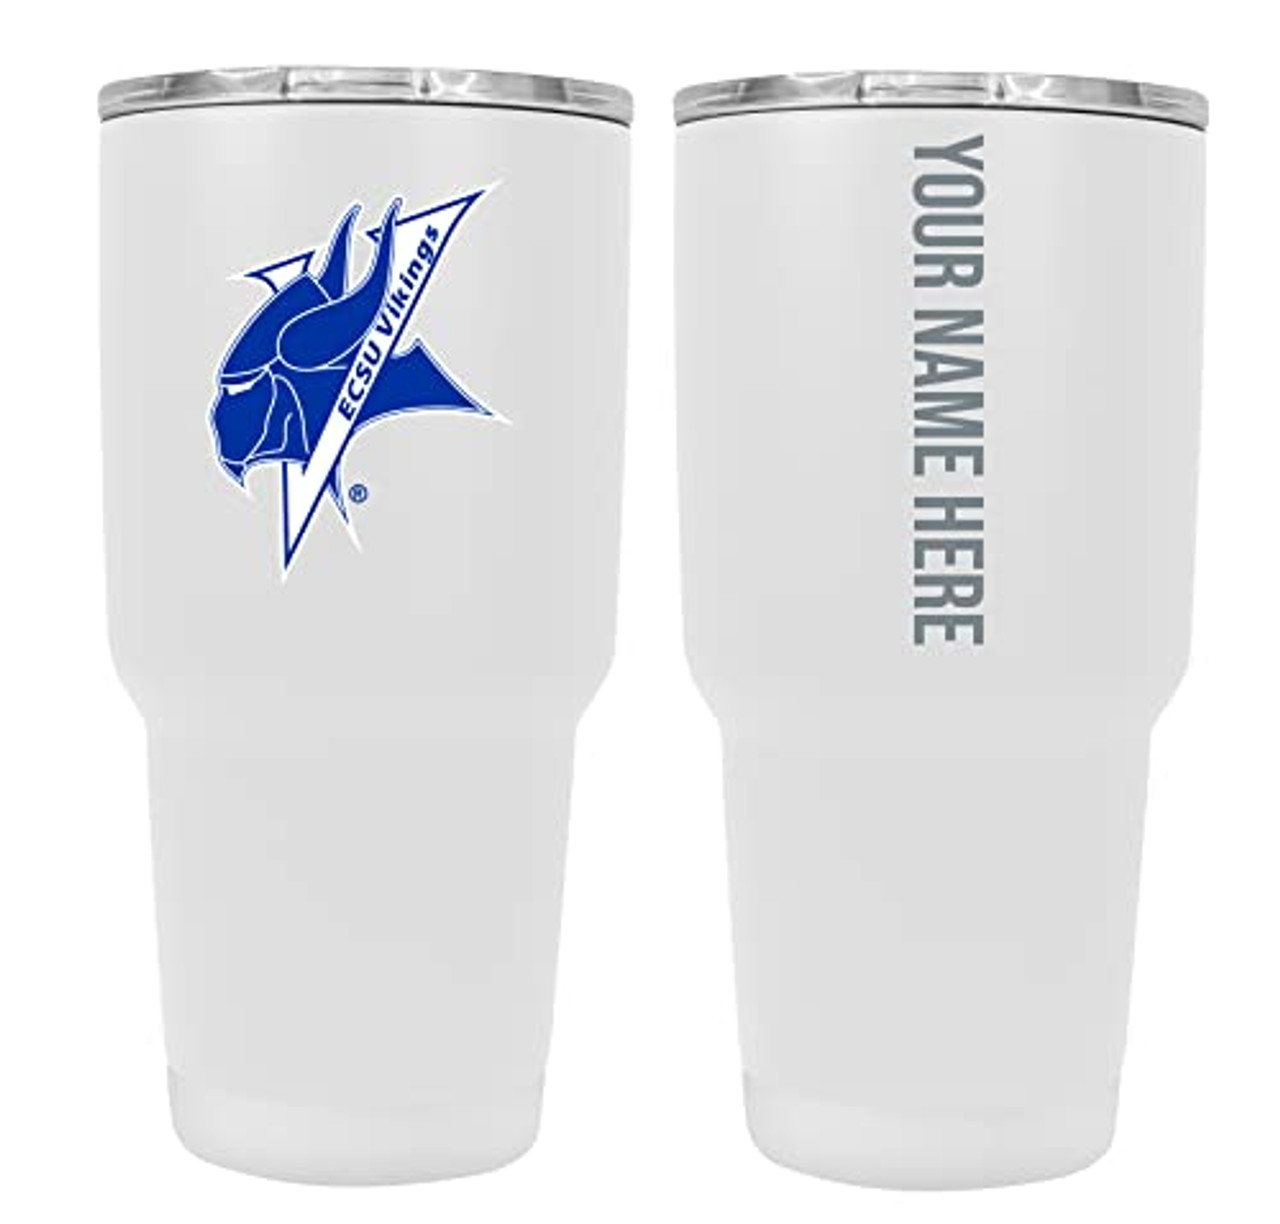 Collegiate Custom Personalized Elizabeth City State University, 24 oz Insulated Stainless Steel Tumbler with Engraved Name (White)